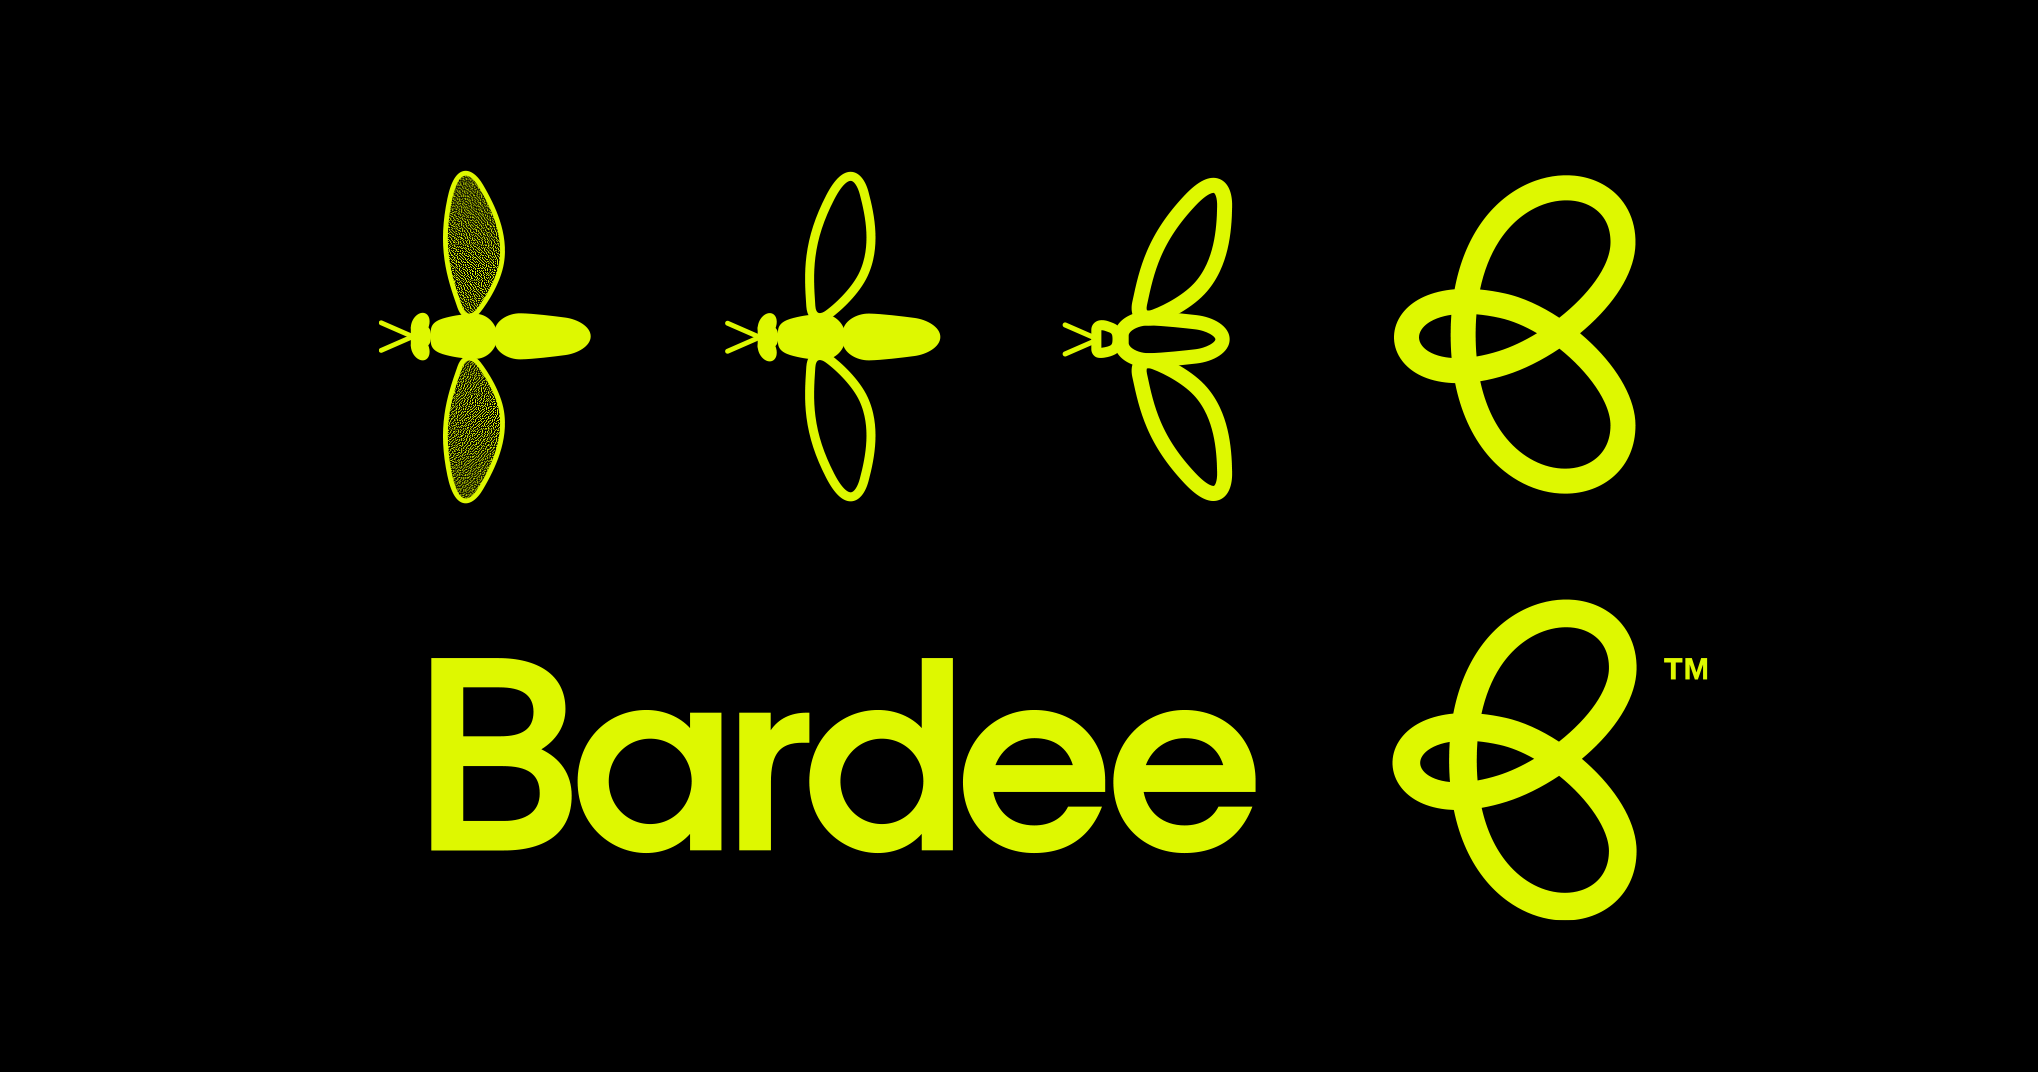 Bardee concept by Alter